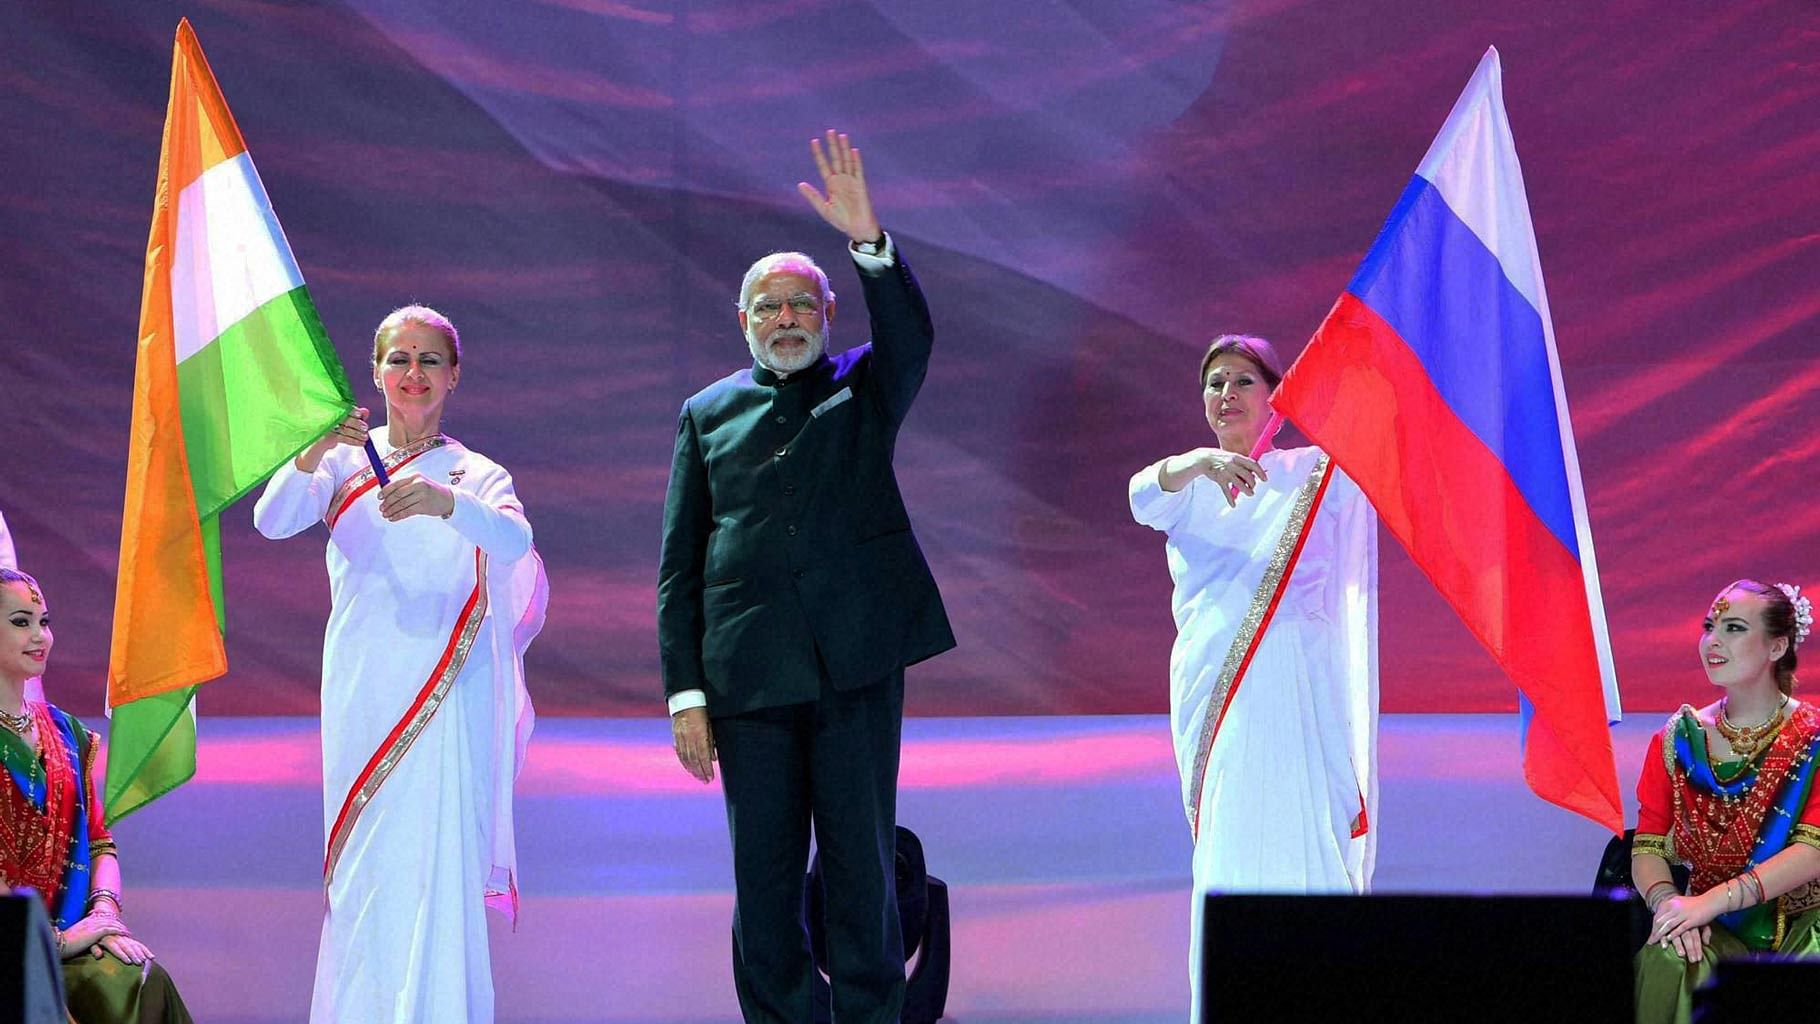 PM Modi at the Friends of India event on December 24 in Moscow, Russia. (Photo: PTI)